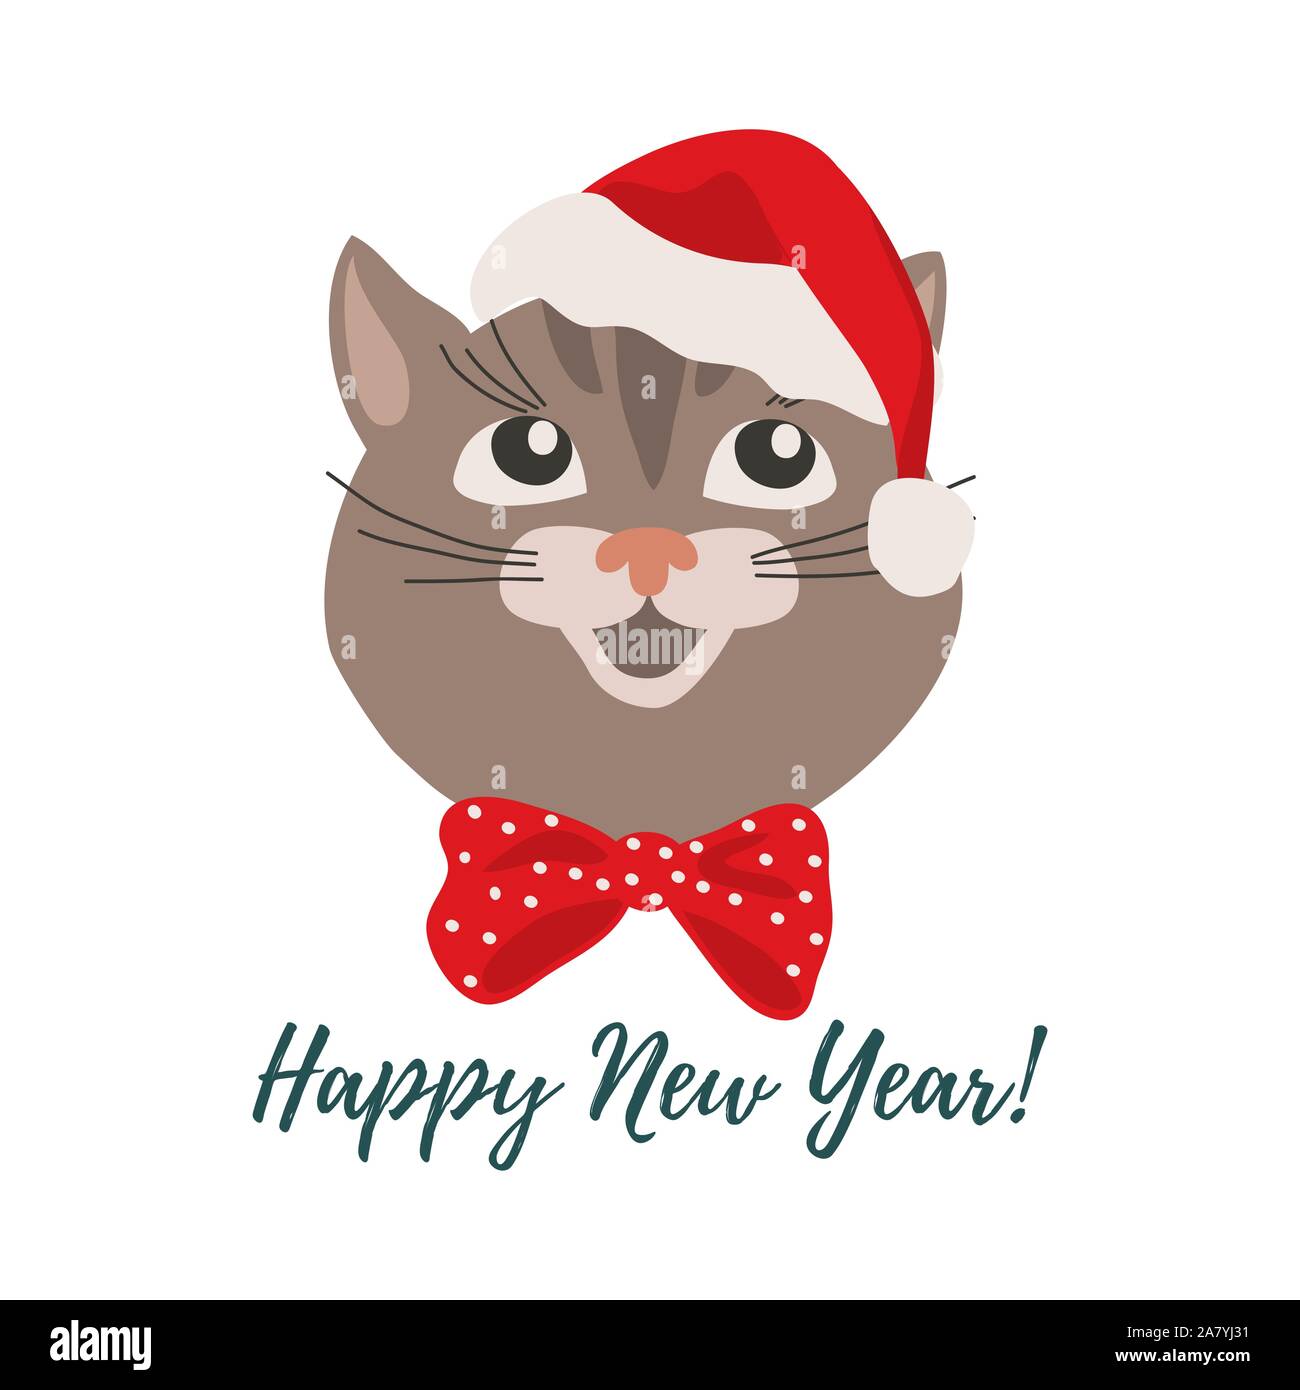 Merry Christmas and Happy New Year. Isolated smiling cartoon face of cat in a red Christmas hat. Cute vector Stock Vector